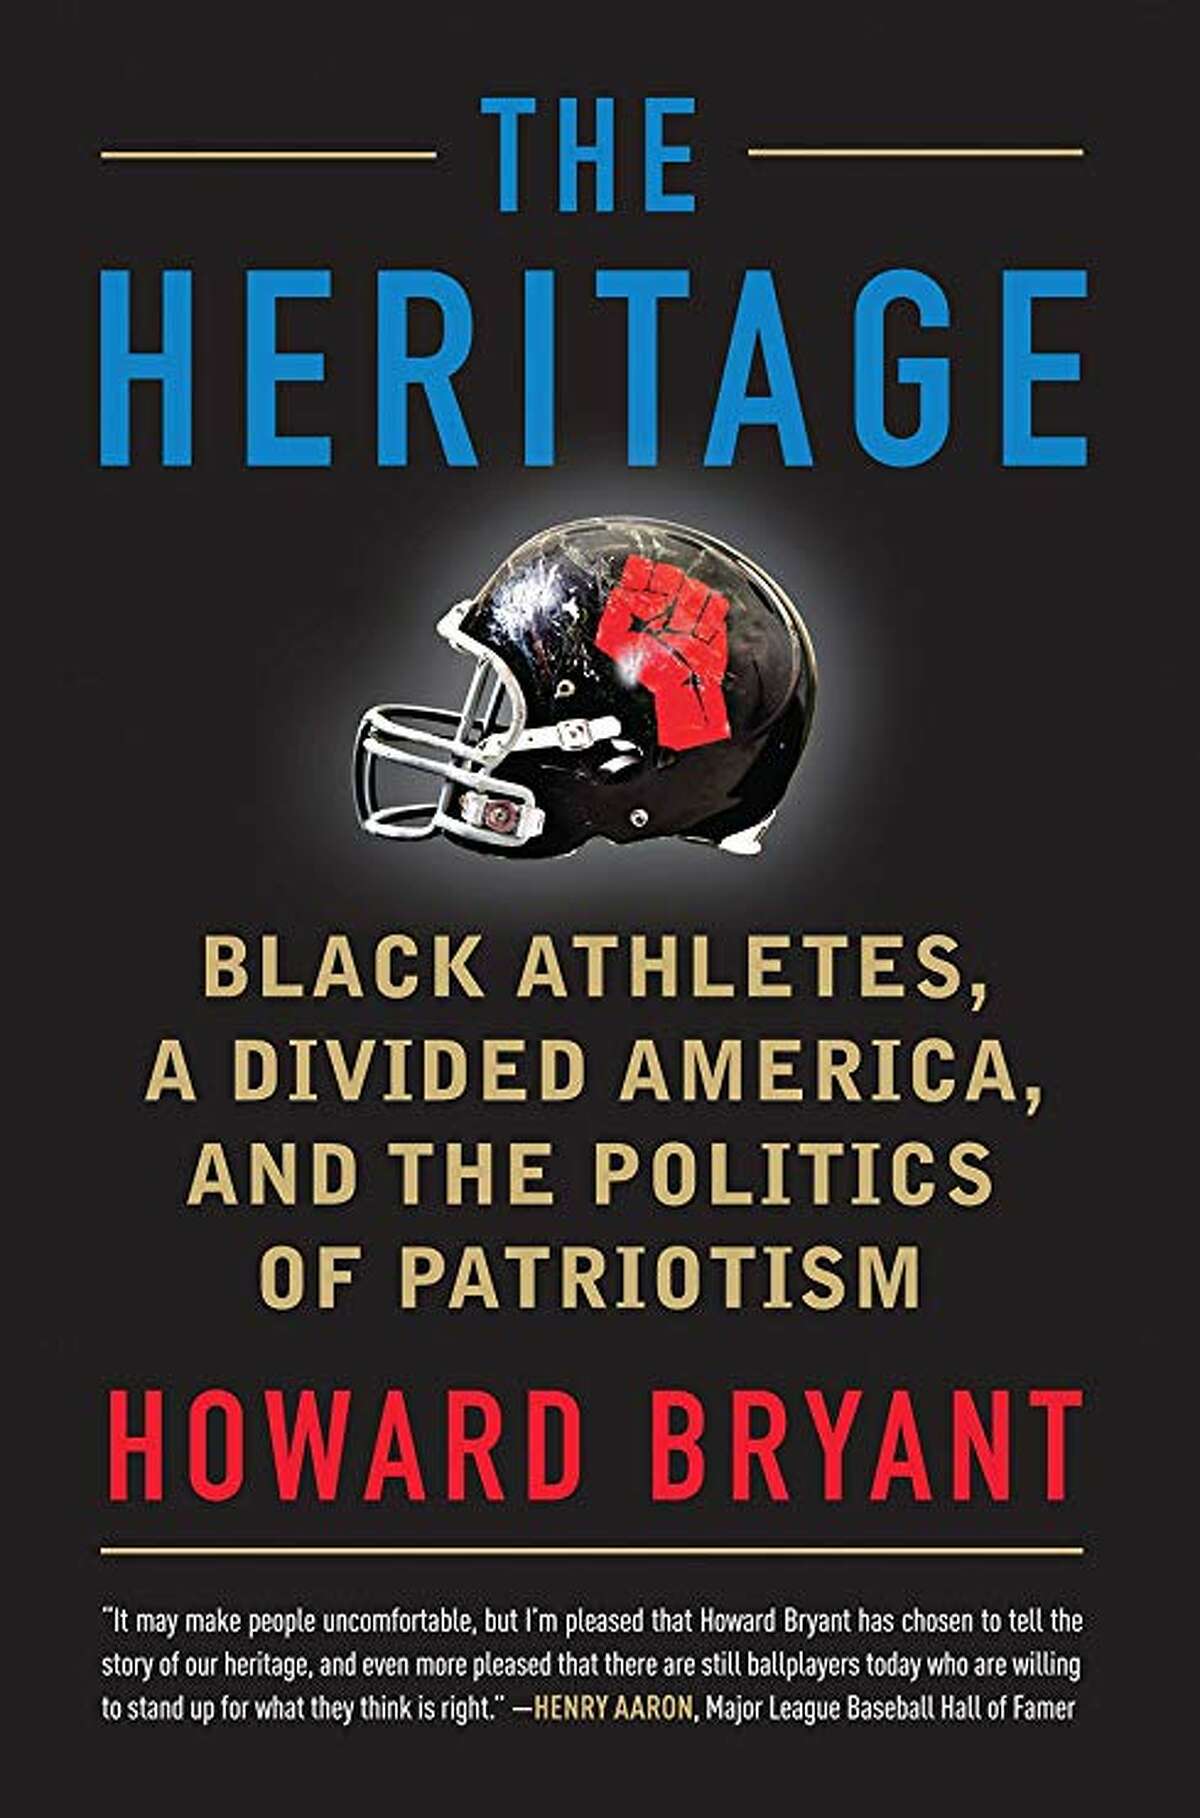 Lonnie Walker IV: “The Heritage: Black Athletes, a Divided America and the Politics of Patriotism” by Howard Bryant